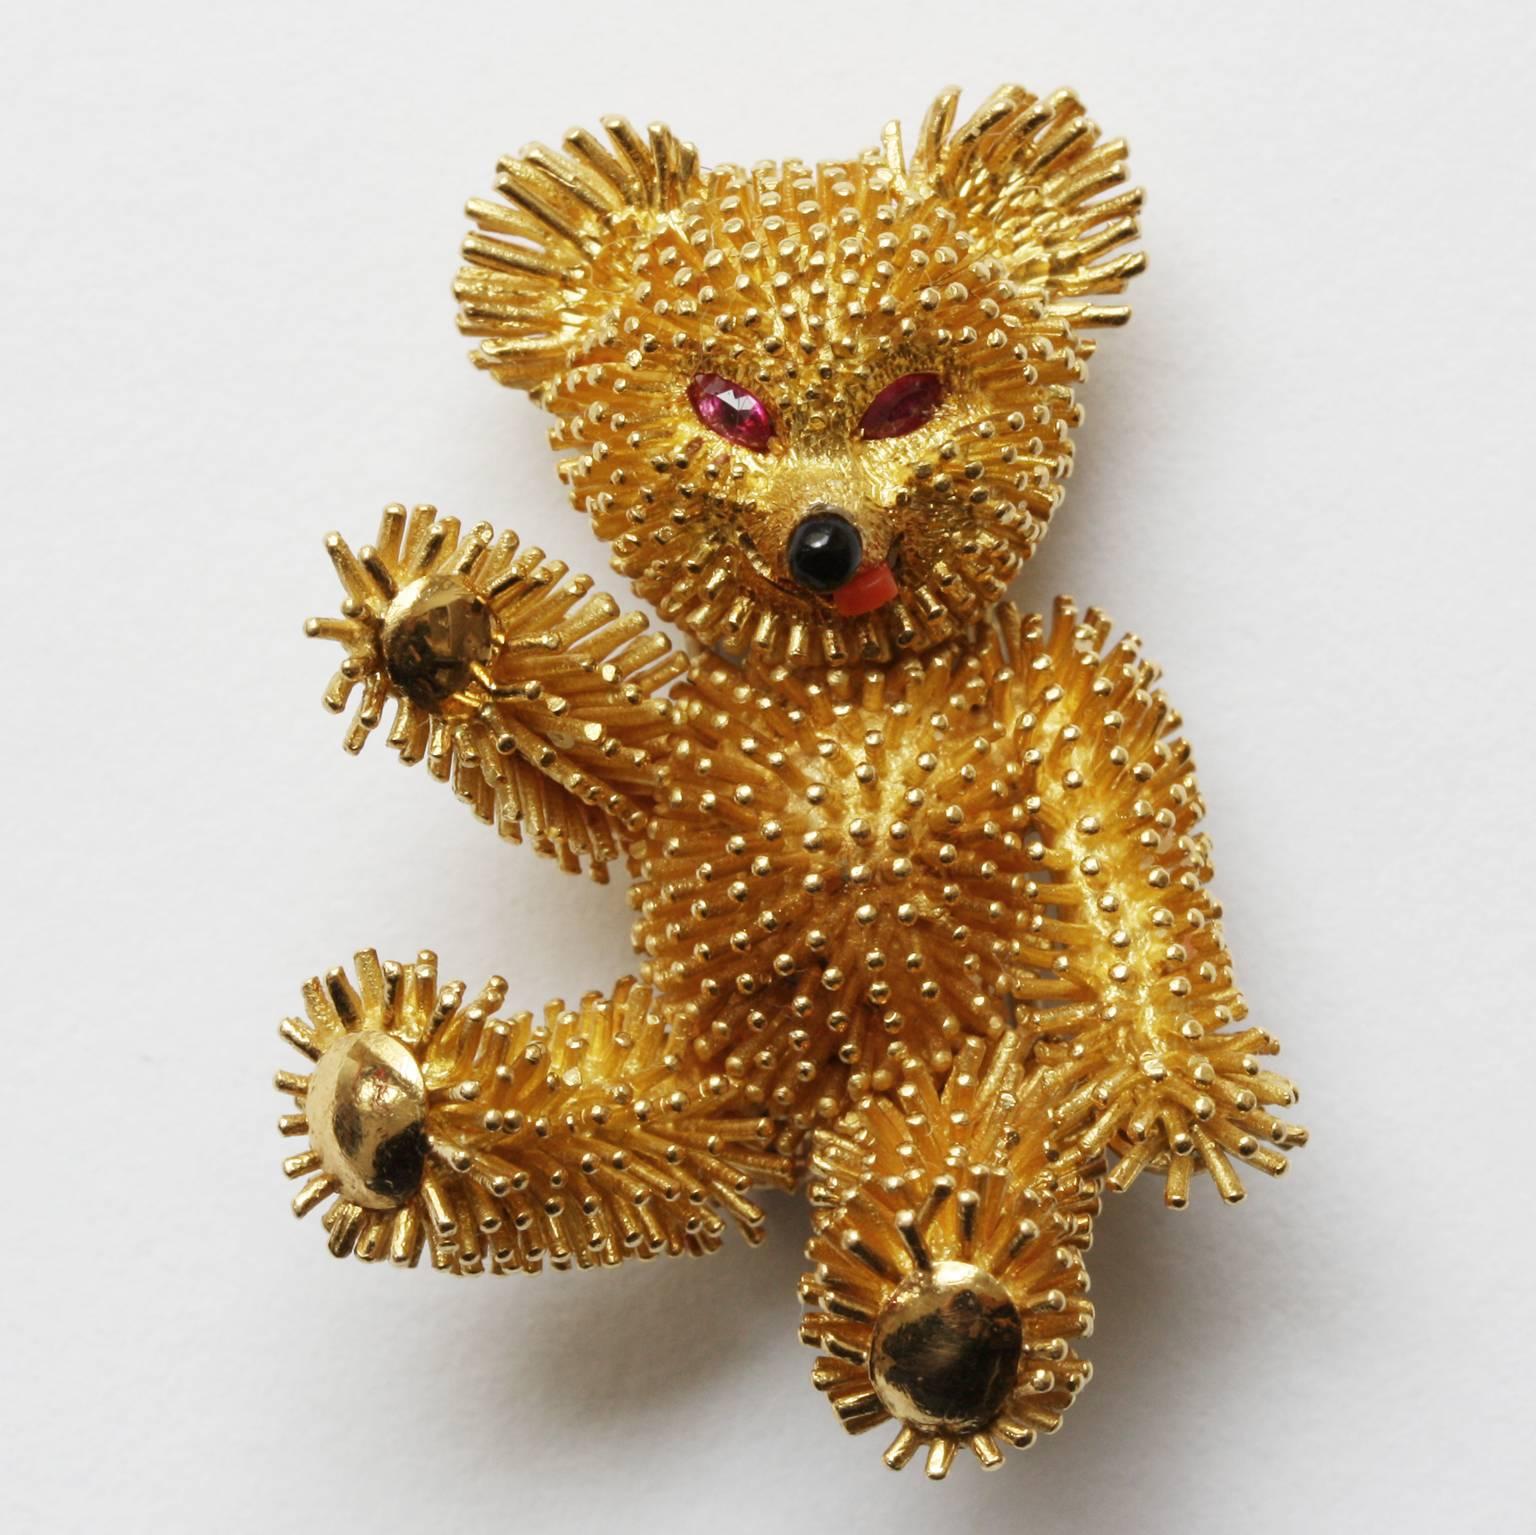 An 18 carat gold brooch in the shape of a teddy bear, with ruby eyes, a carnelian tongue and a black enamel nose, signed and numbered: Van Cleef & Arpels, 1324B, Paris, circa 1965.

weight: 22.6 gram
dimensions: 3.8 x 2.9 cm